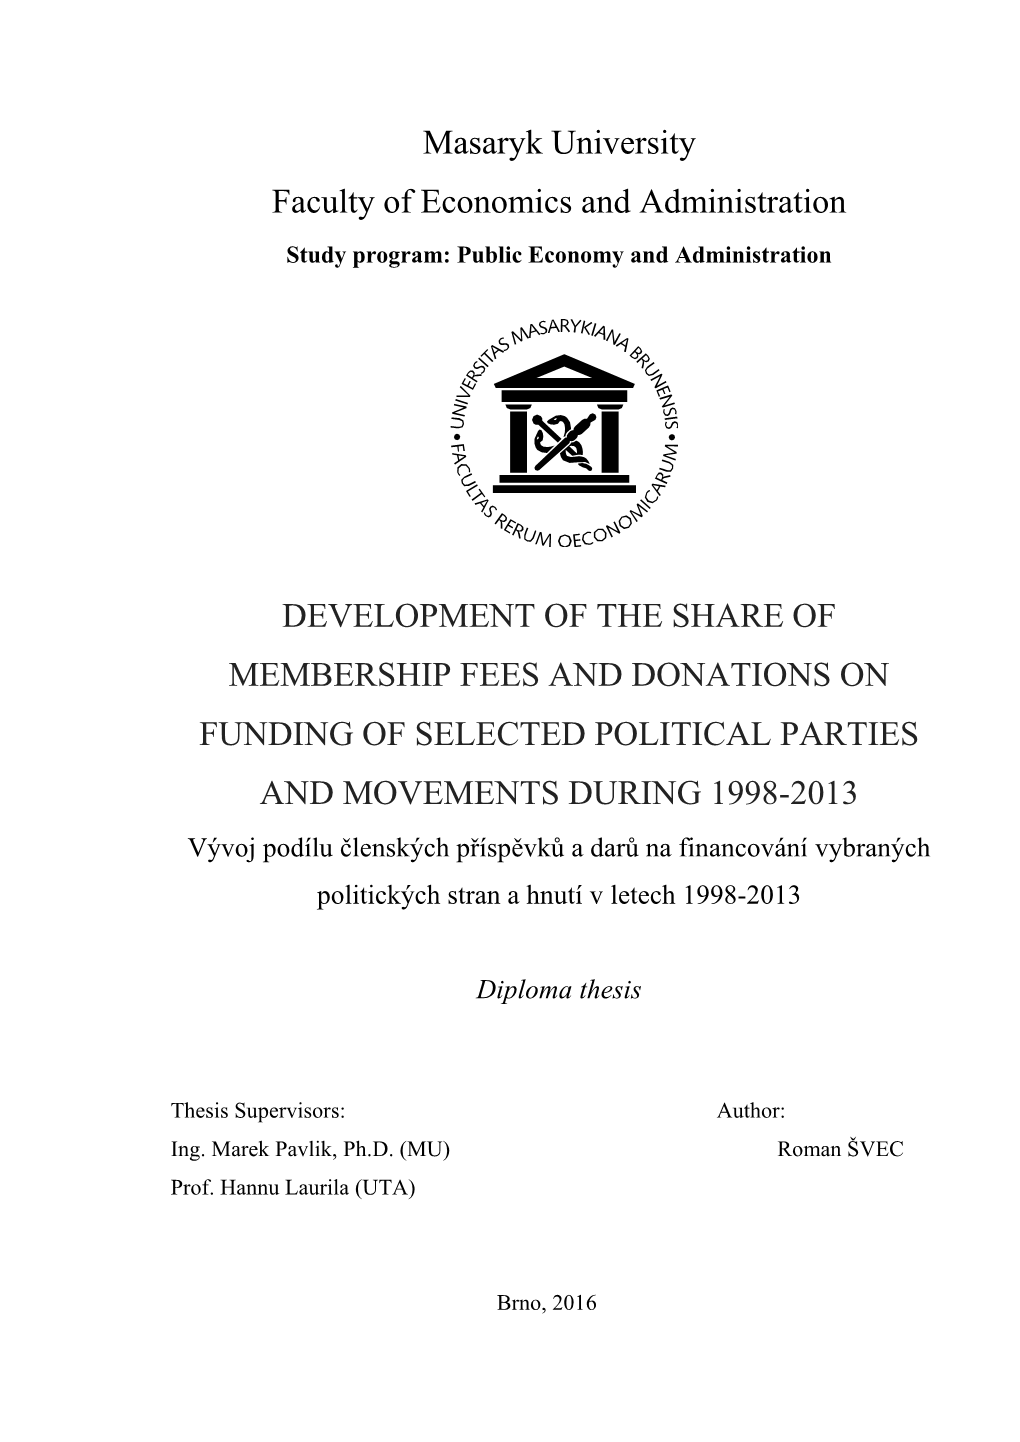 Development of the Share of Membership Fees and Donations On